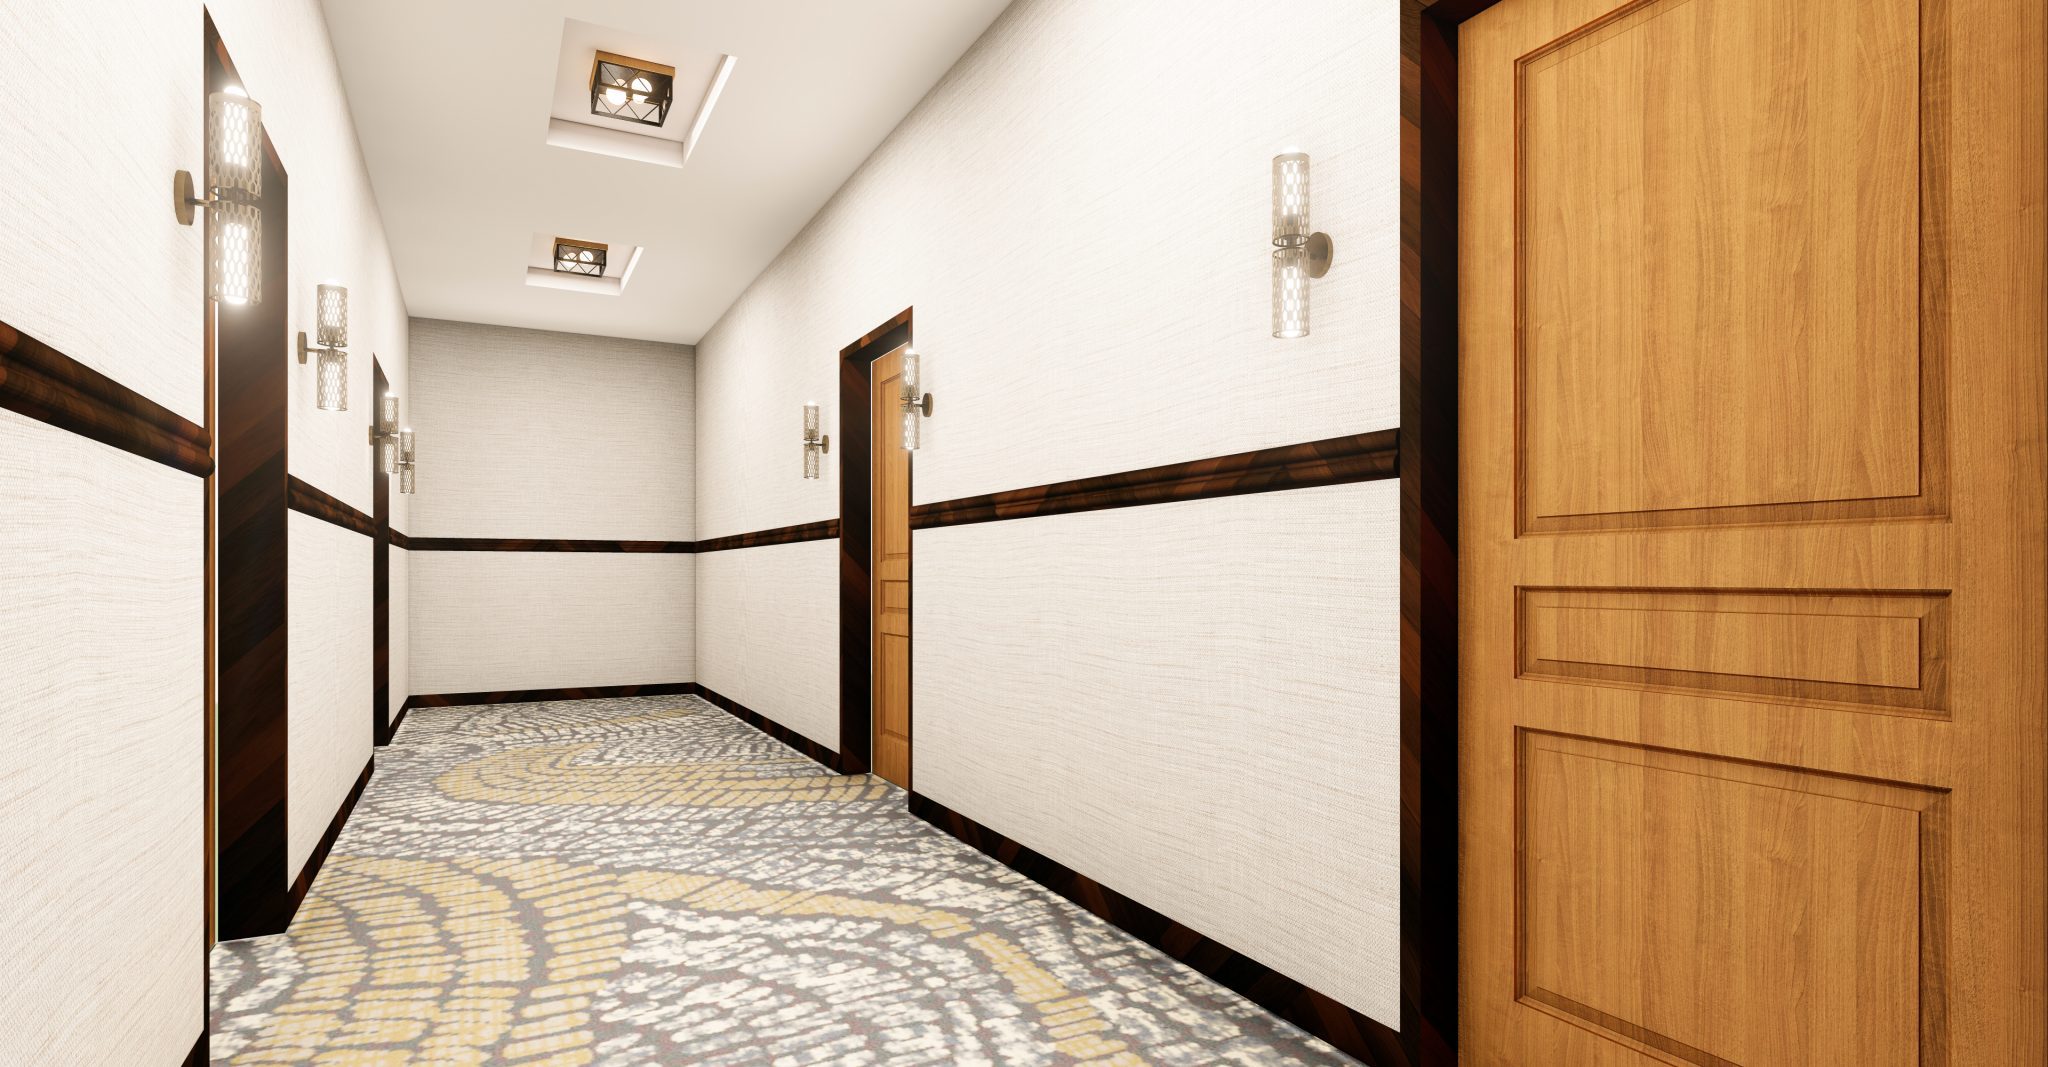 Crisp, modern hotel hallway with dark wood and light, warm tone walls and carpeted floors.